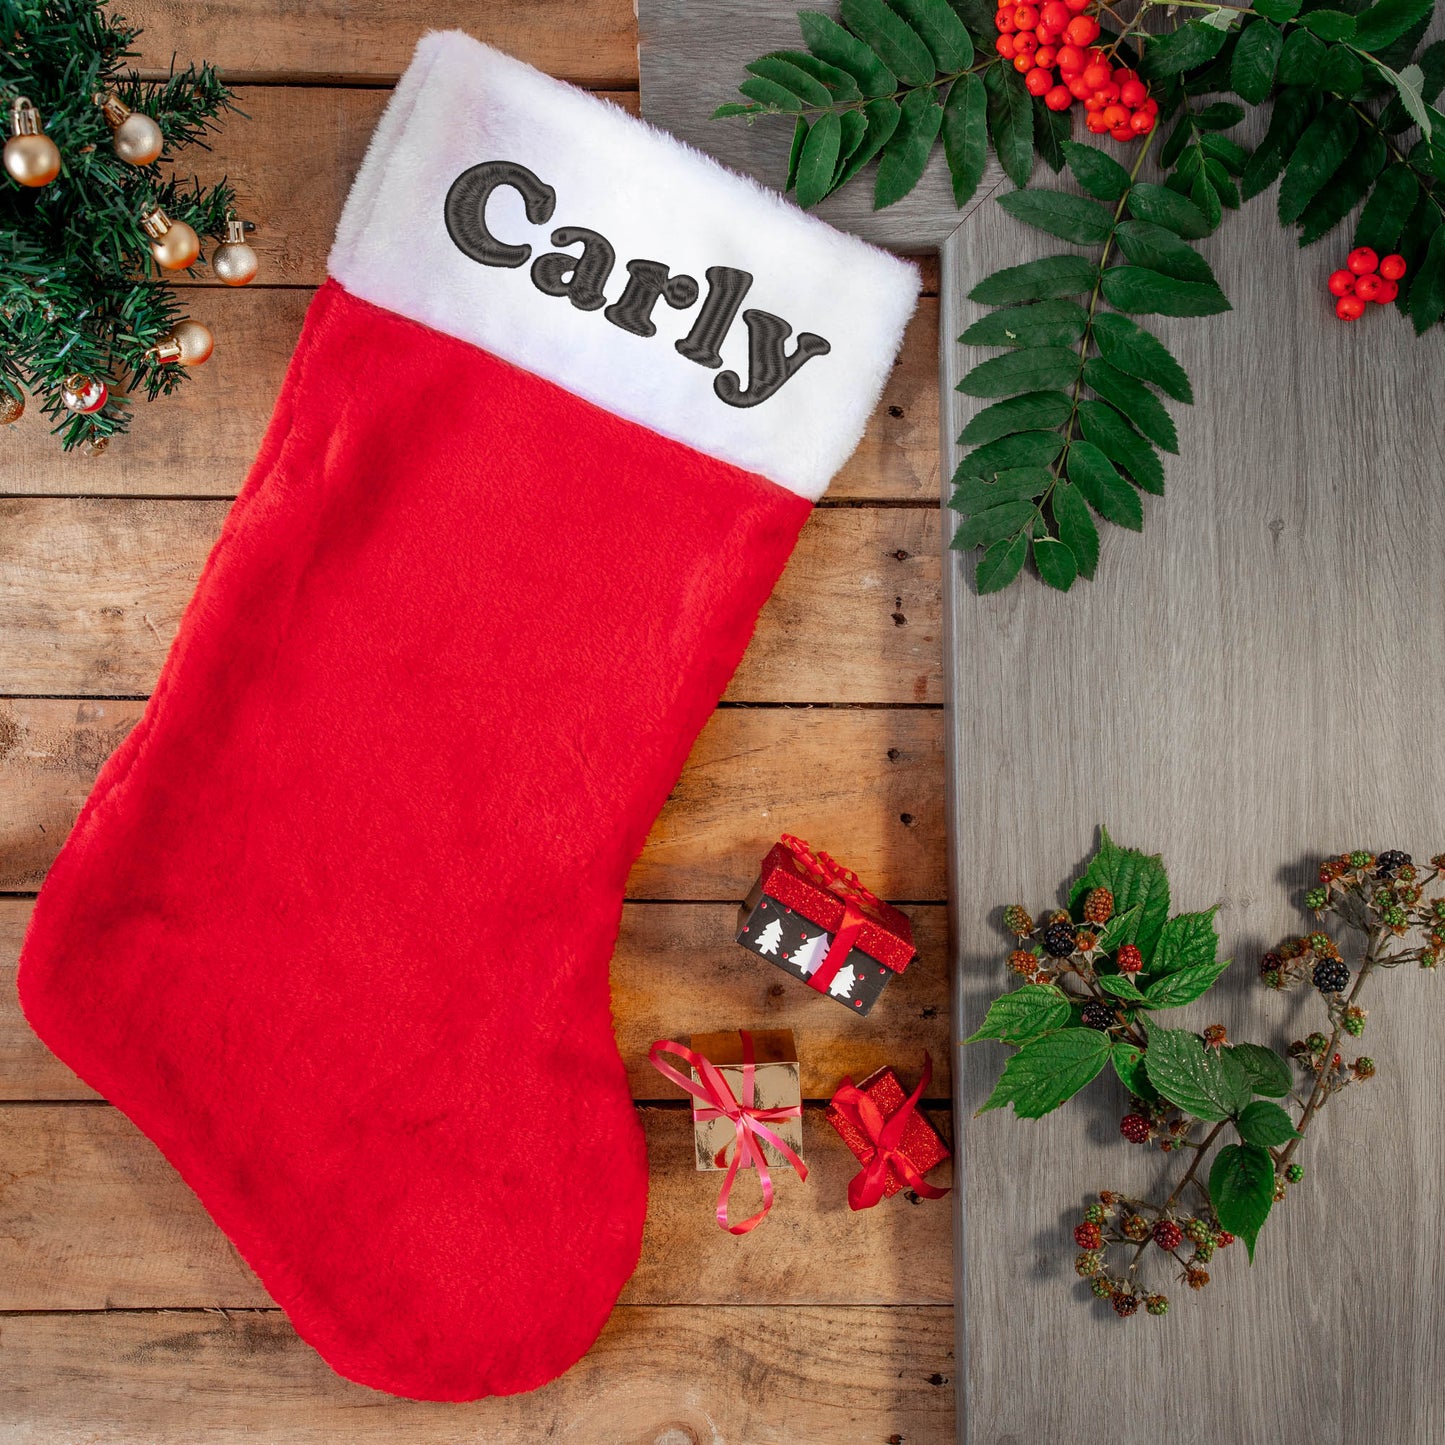 Personalised Christmas Plush Red Santa Sack and/or Stocking Embroidered Name Gift Set  - Always Looking Good - Jumbo Stocking Only  